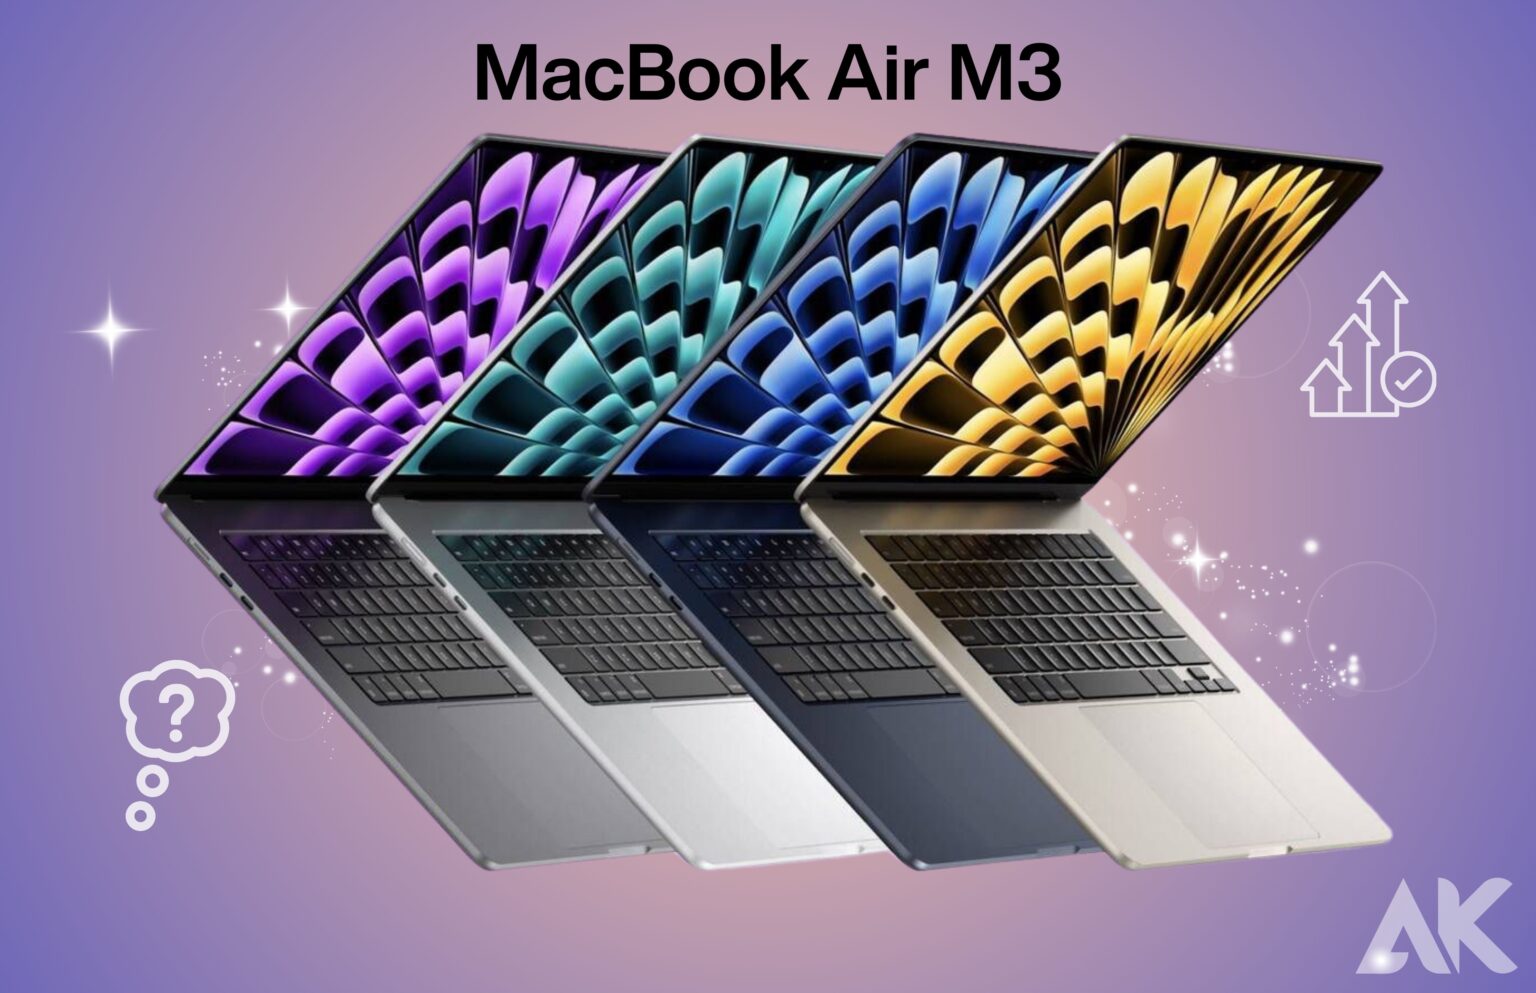 Apple's Rumored Macbook Air M3 15-inch: What to Expect